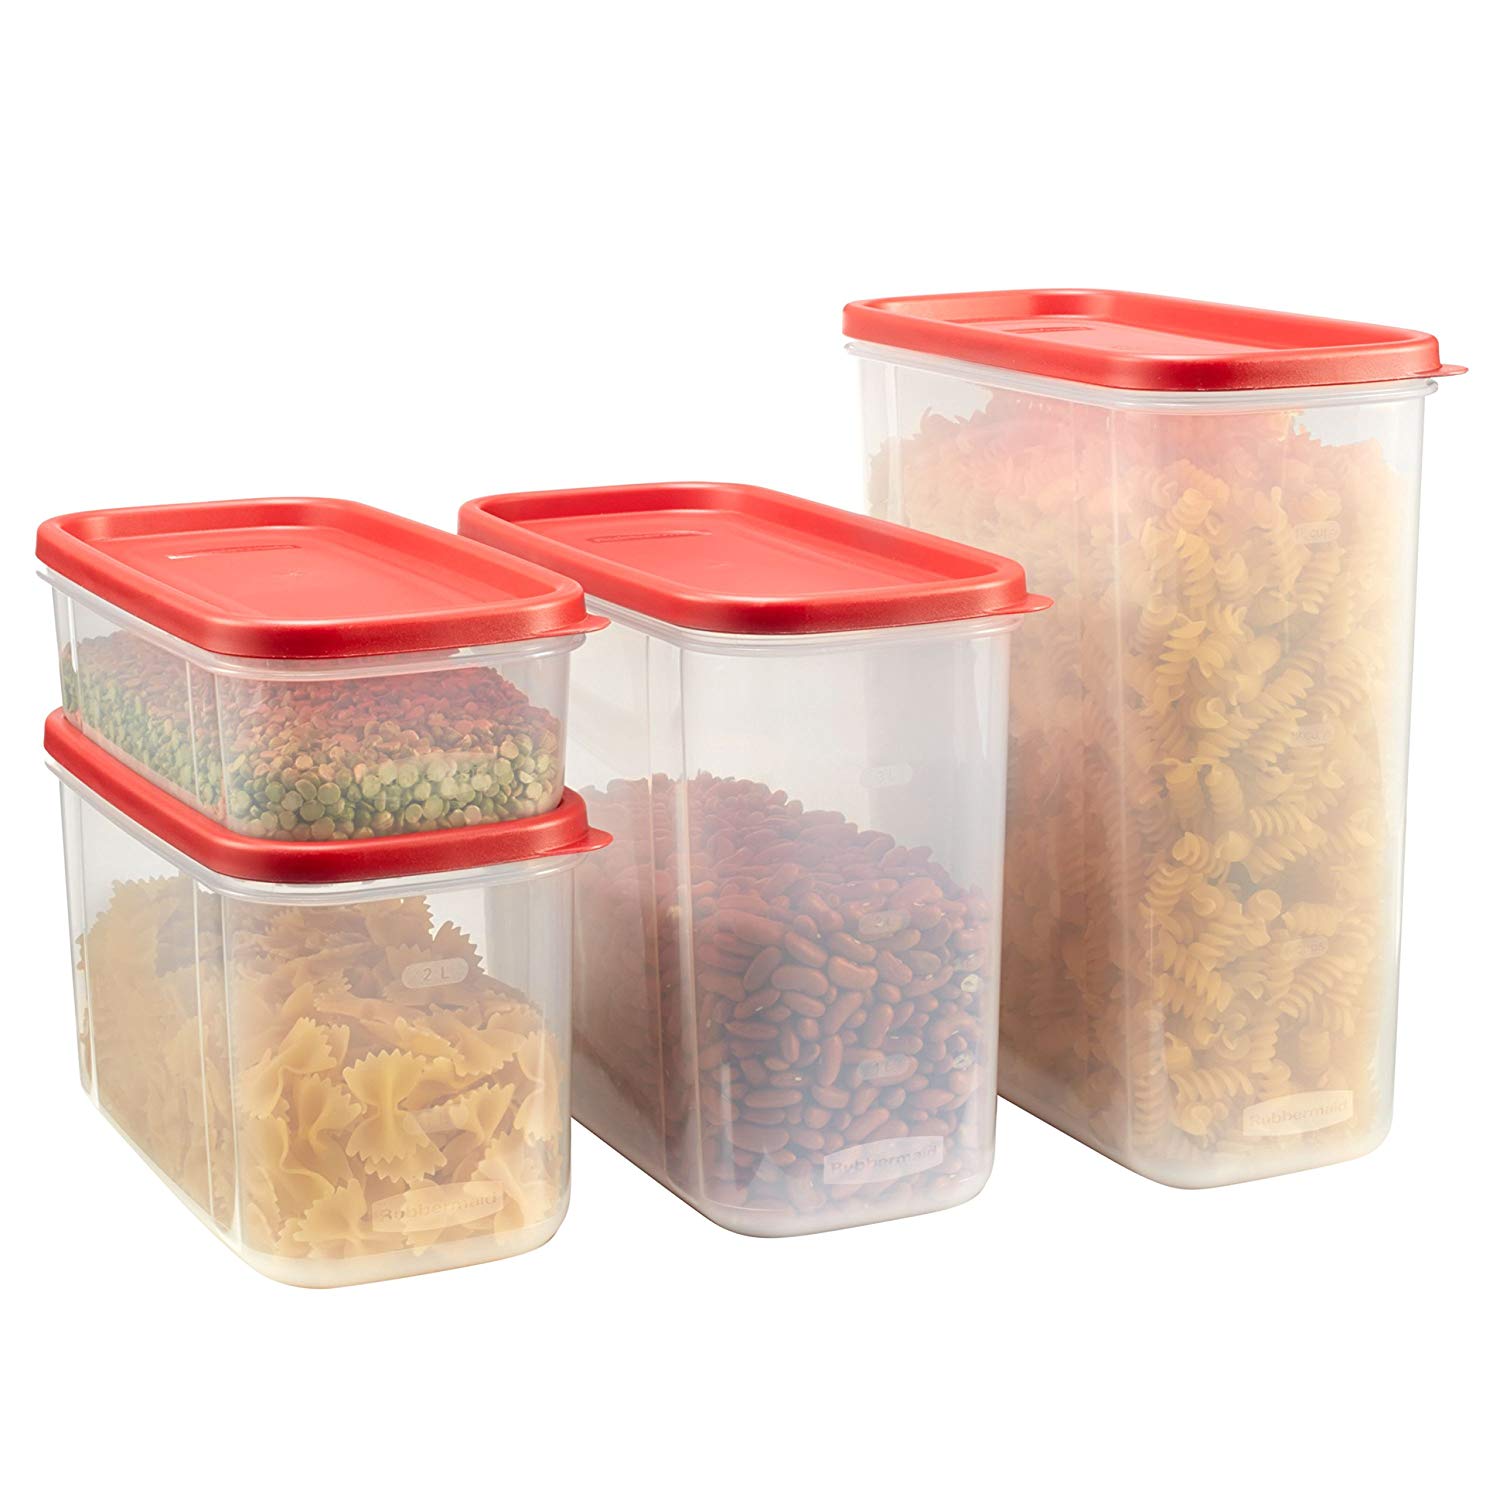 Rubbermaid Modular Canisters Food Storage Containers – 8-piece Set – Just $16.22!